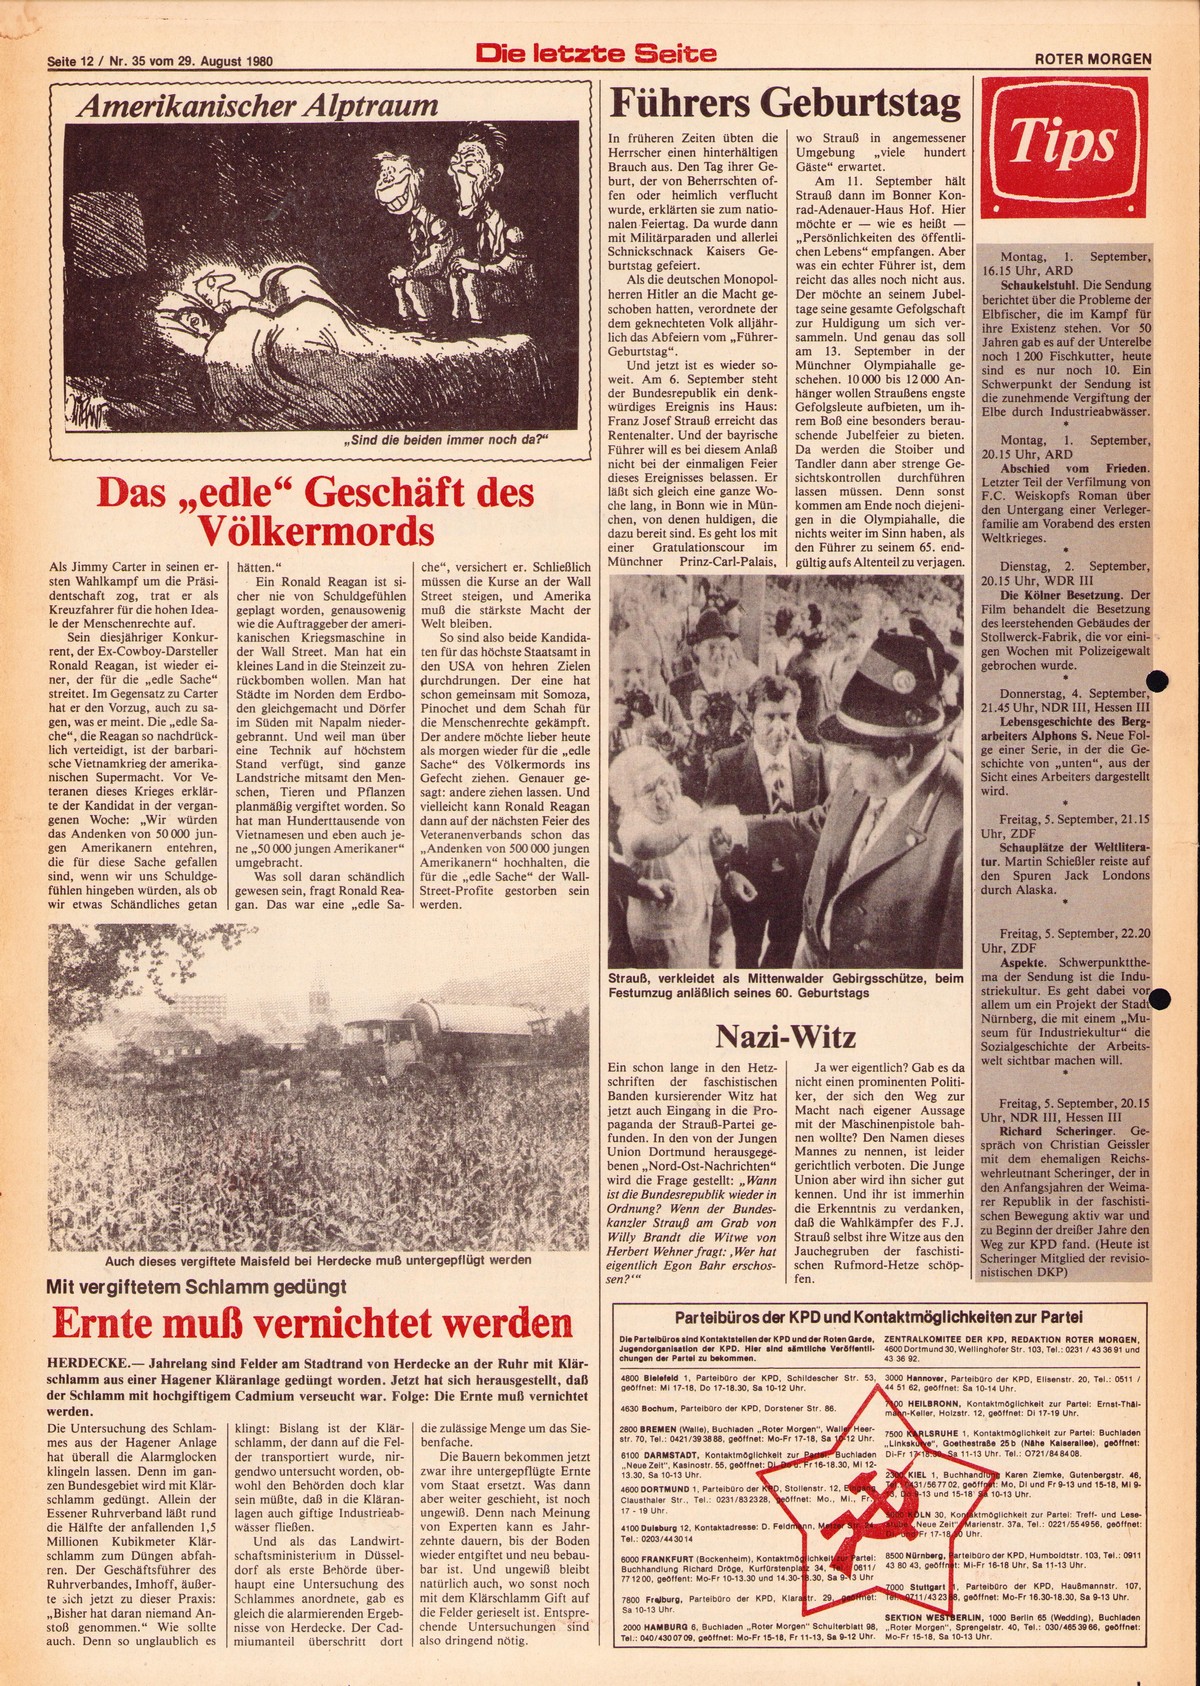 Roter Morgen, 14. Jg., 29. August 1980, Nr. 35, Seite 12